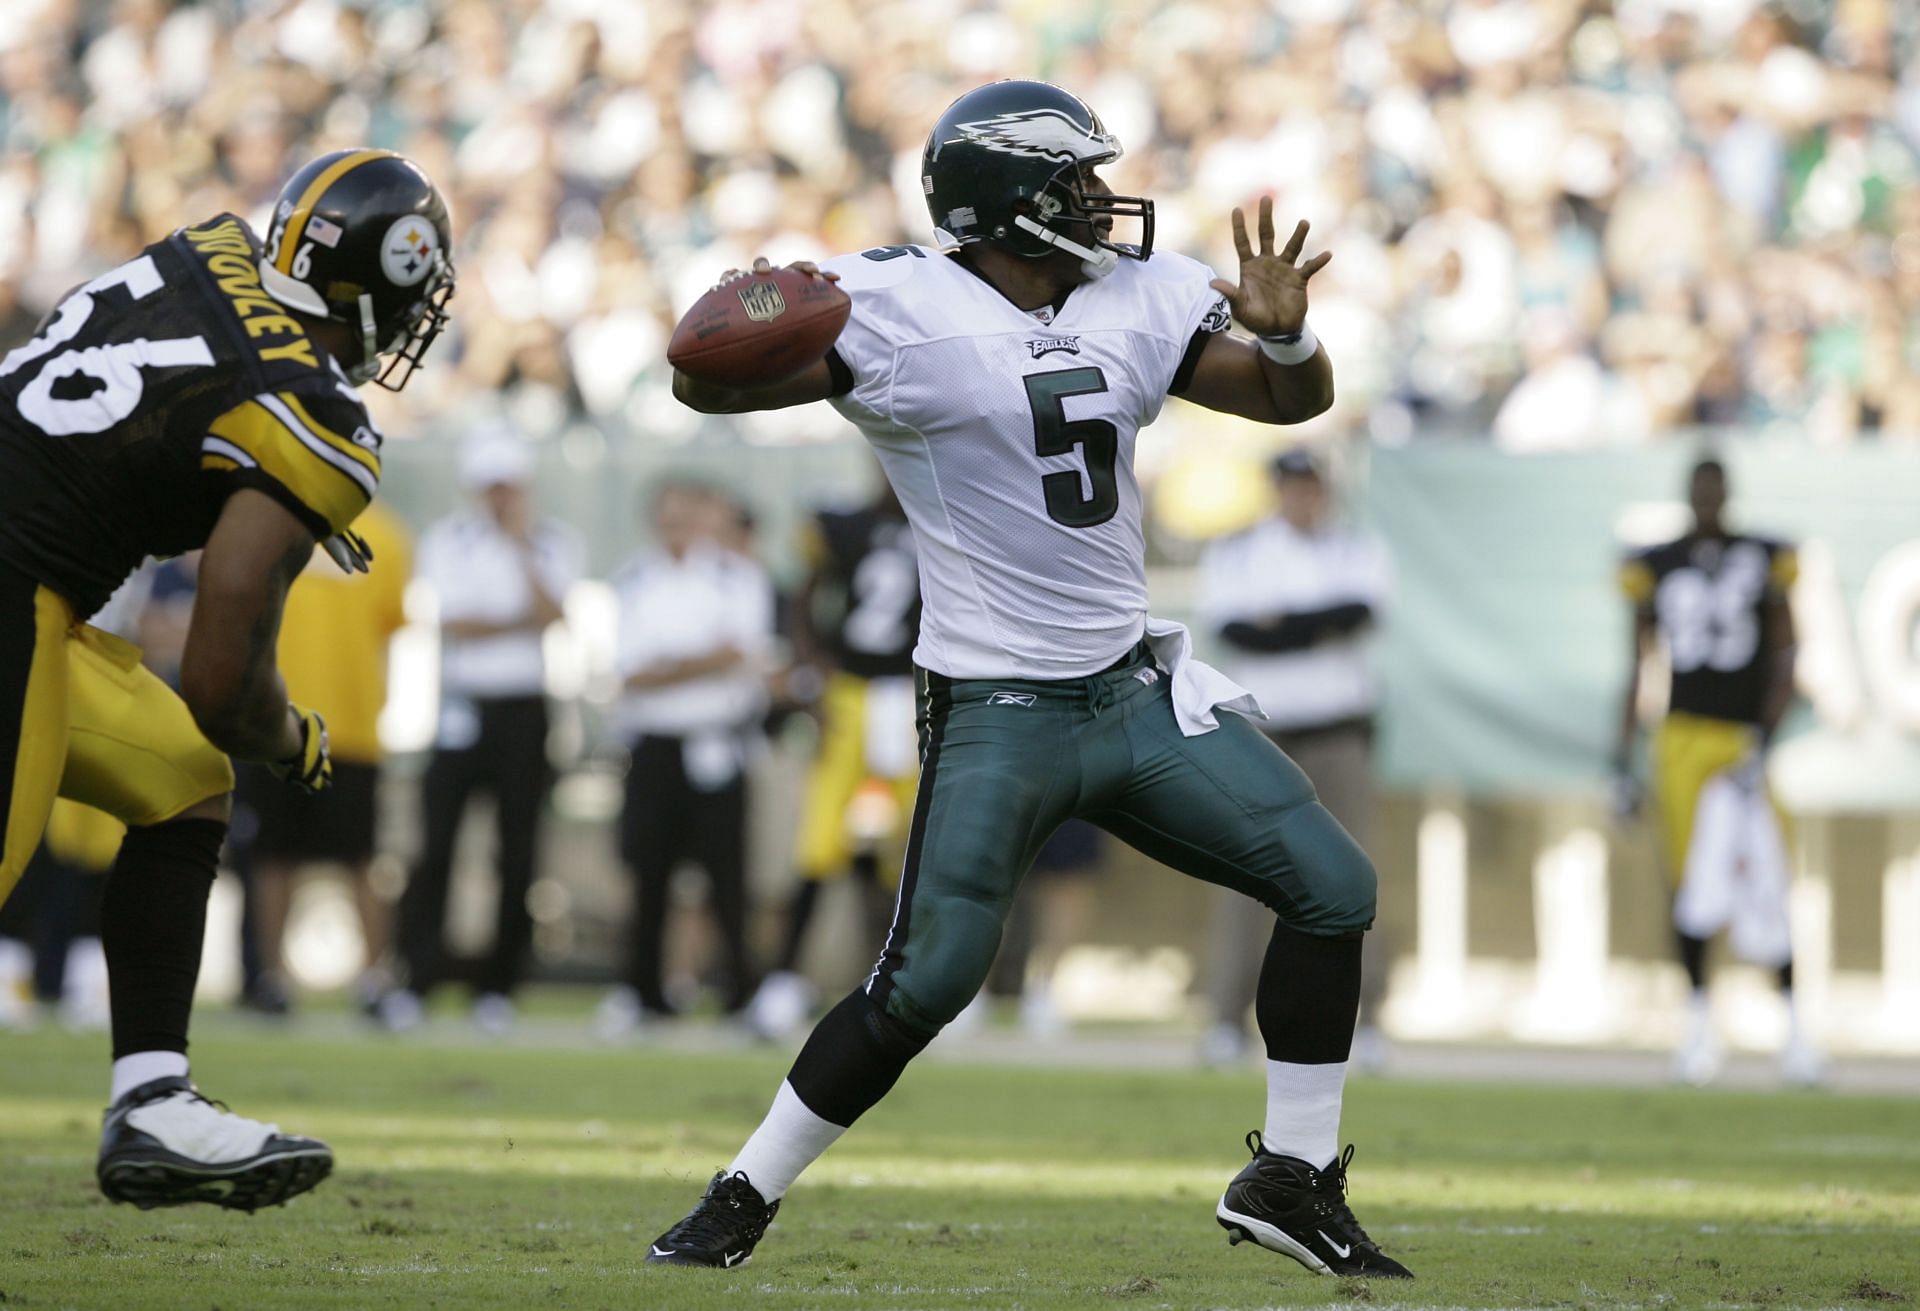 McNabb spent the majority of his career with the Eagles (Image via Getty Images)